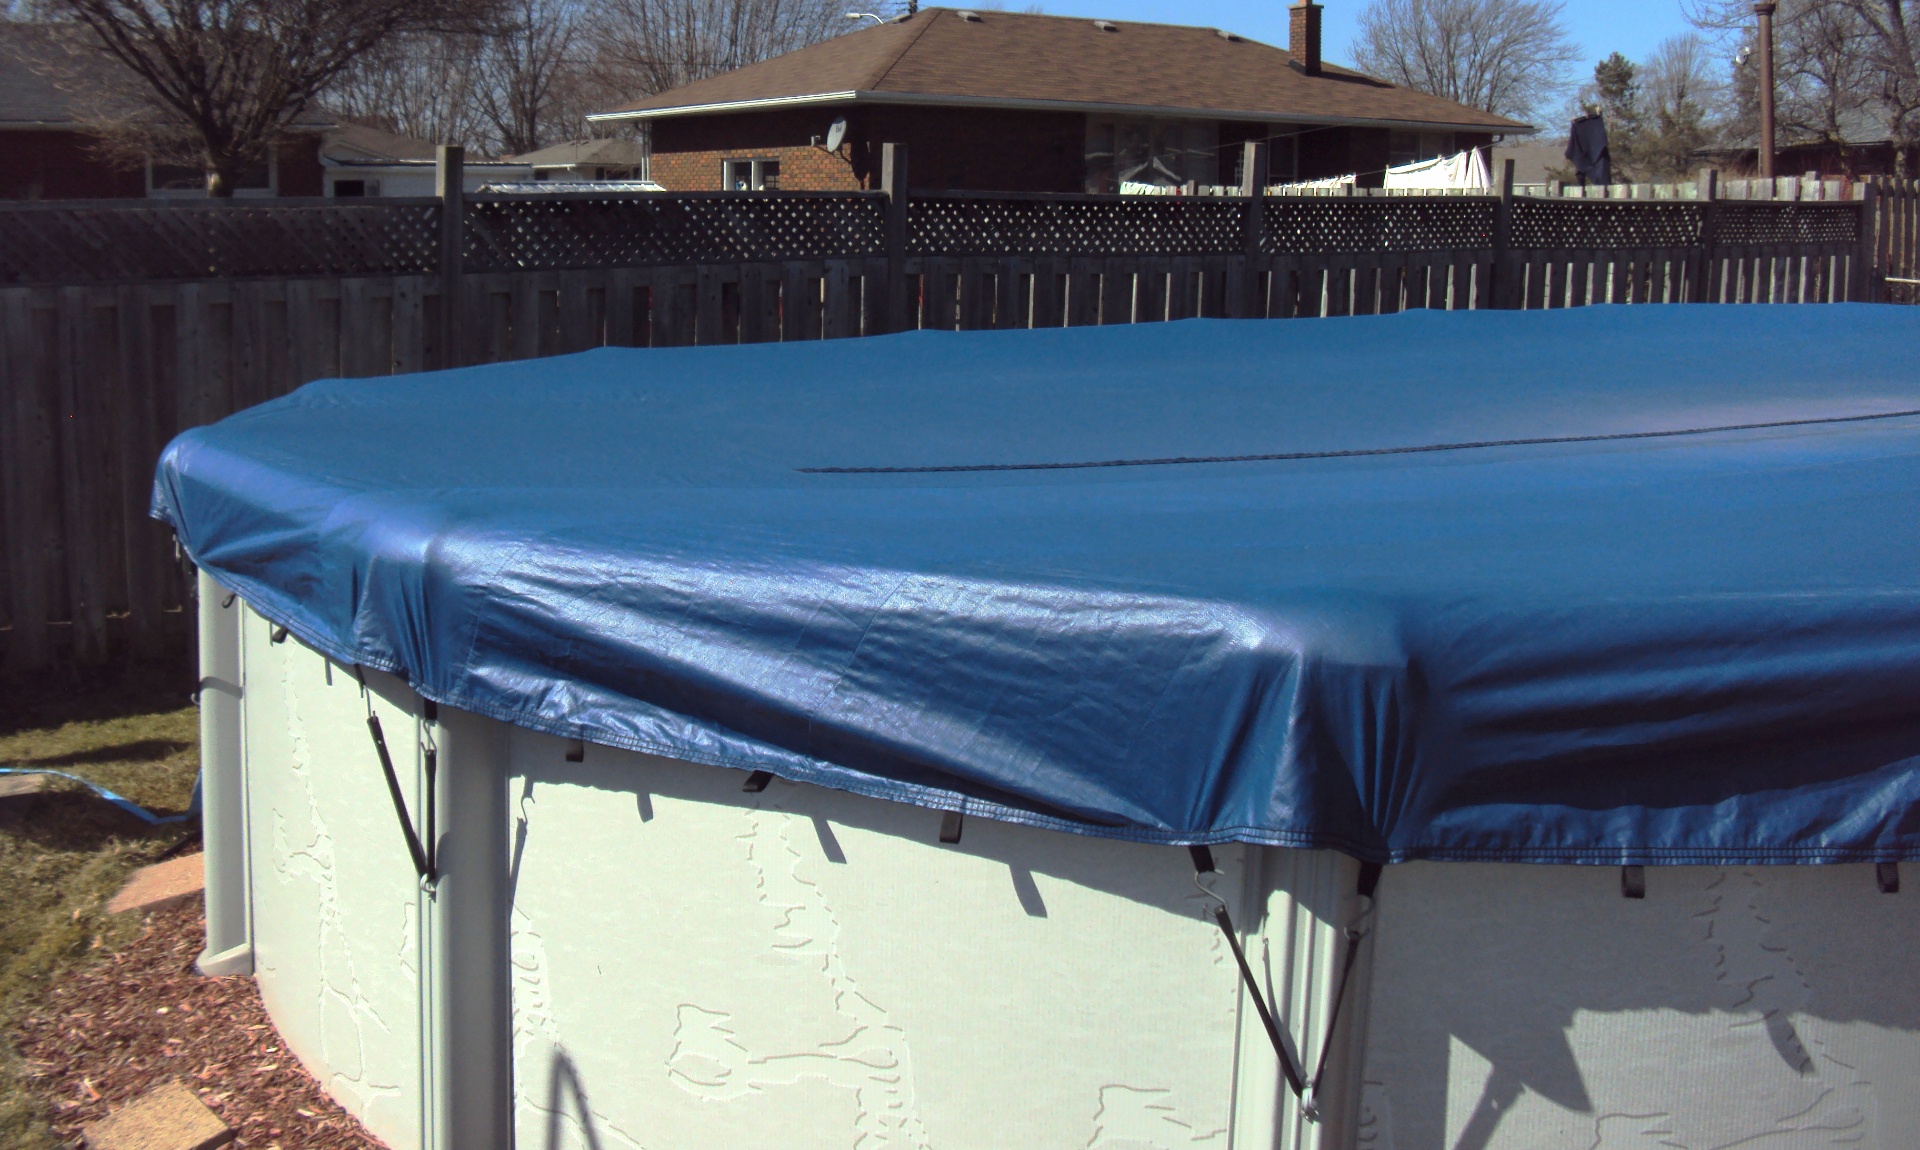 Arctic Blue Covers Above Ground, How To Put A Winter Cover On An Above Ground Pool With Partial Deck